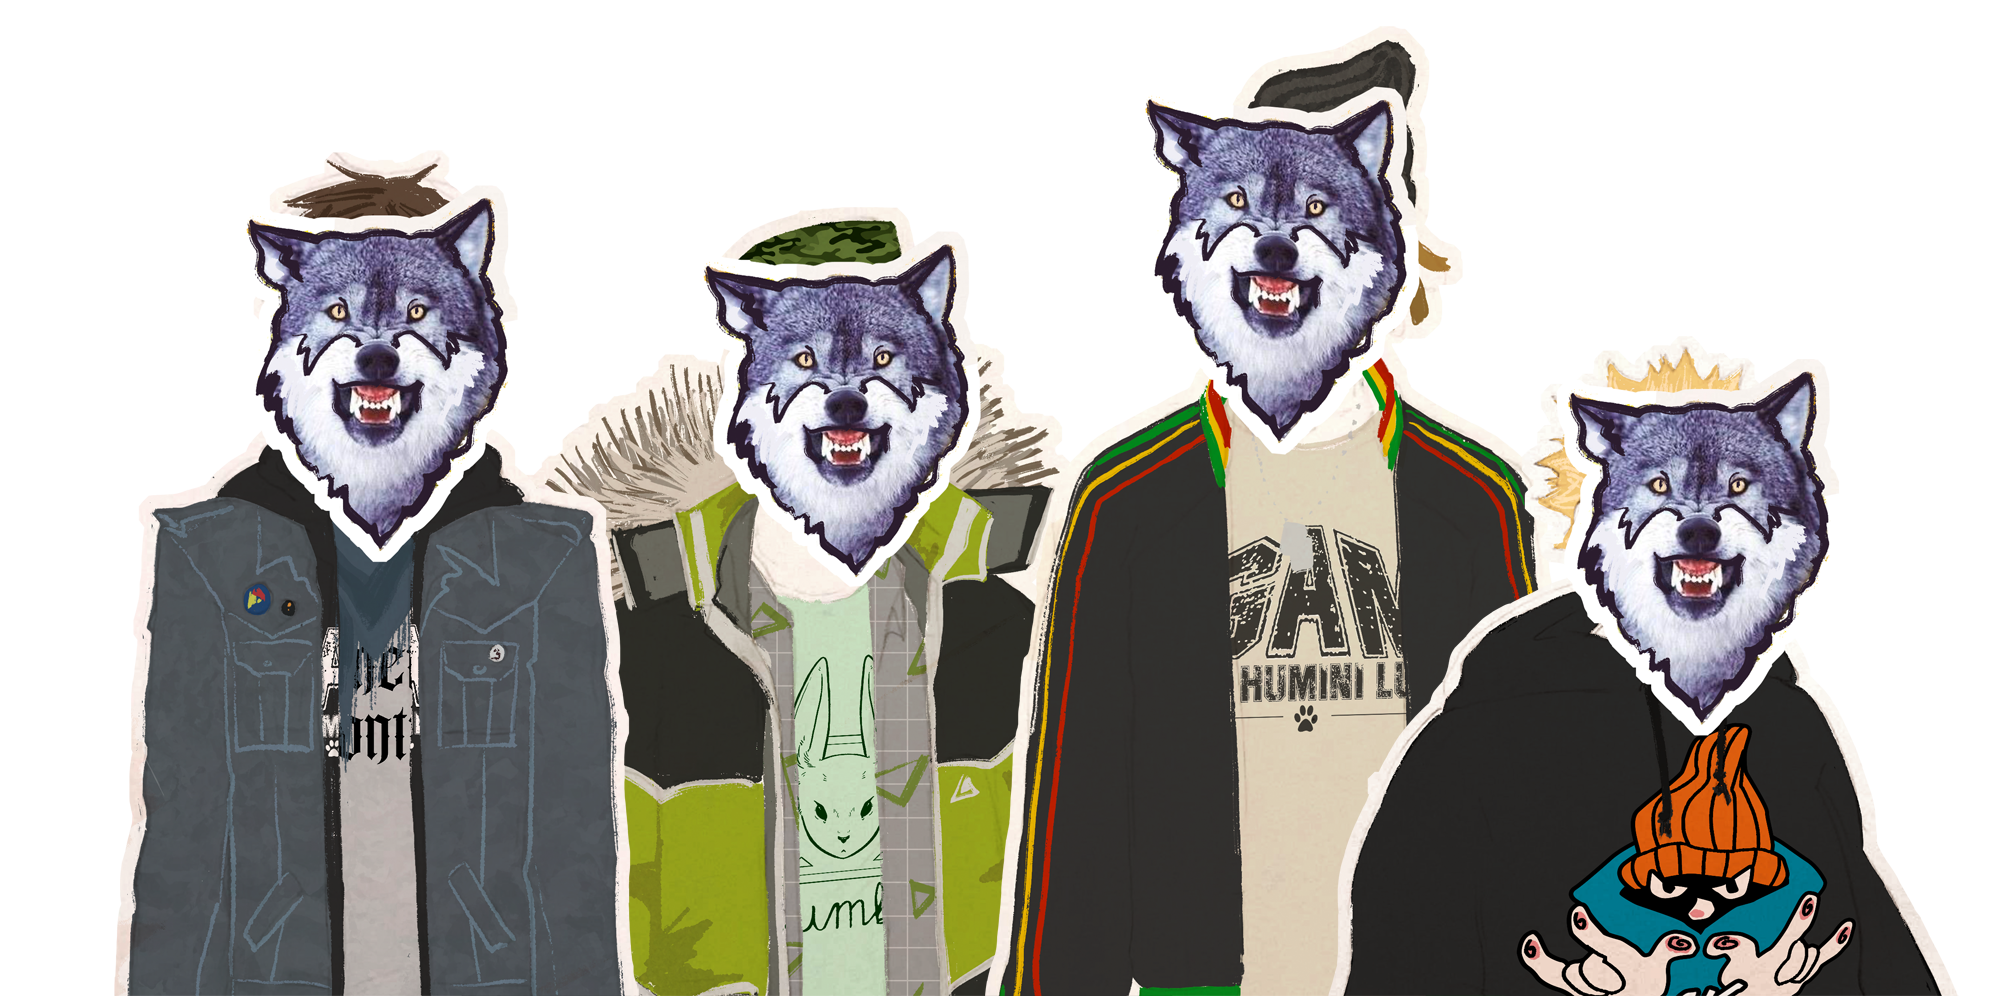 A cropped version of the lineup above, with just the Werewolf and the Wolves, from their chest up. They all have the same photo of a wolf's head over their faces as masks.